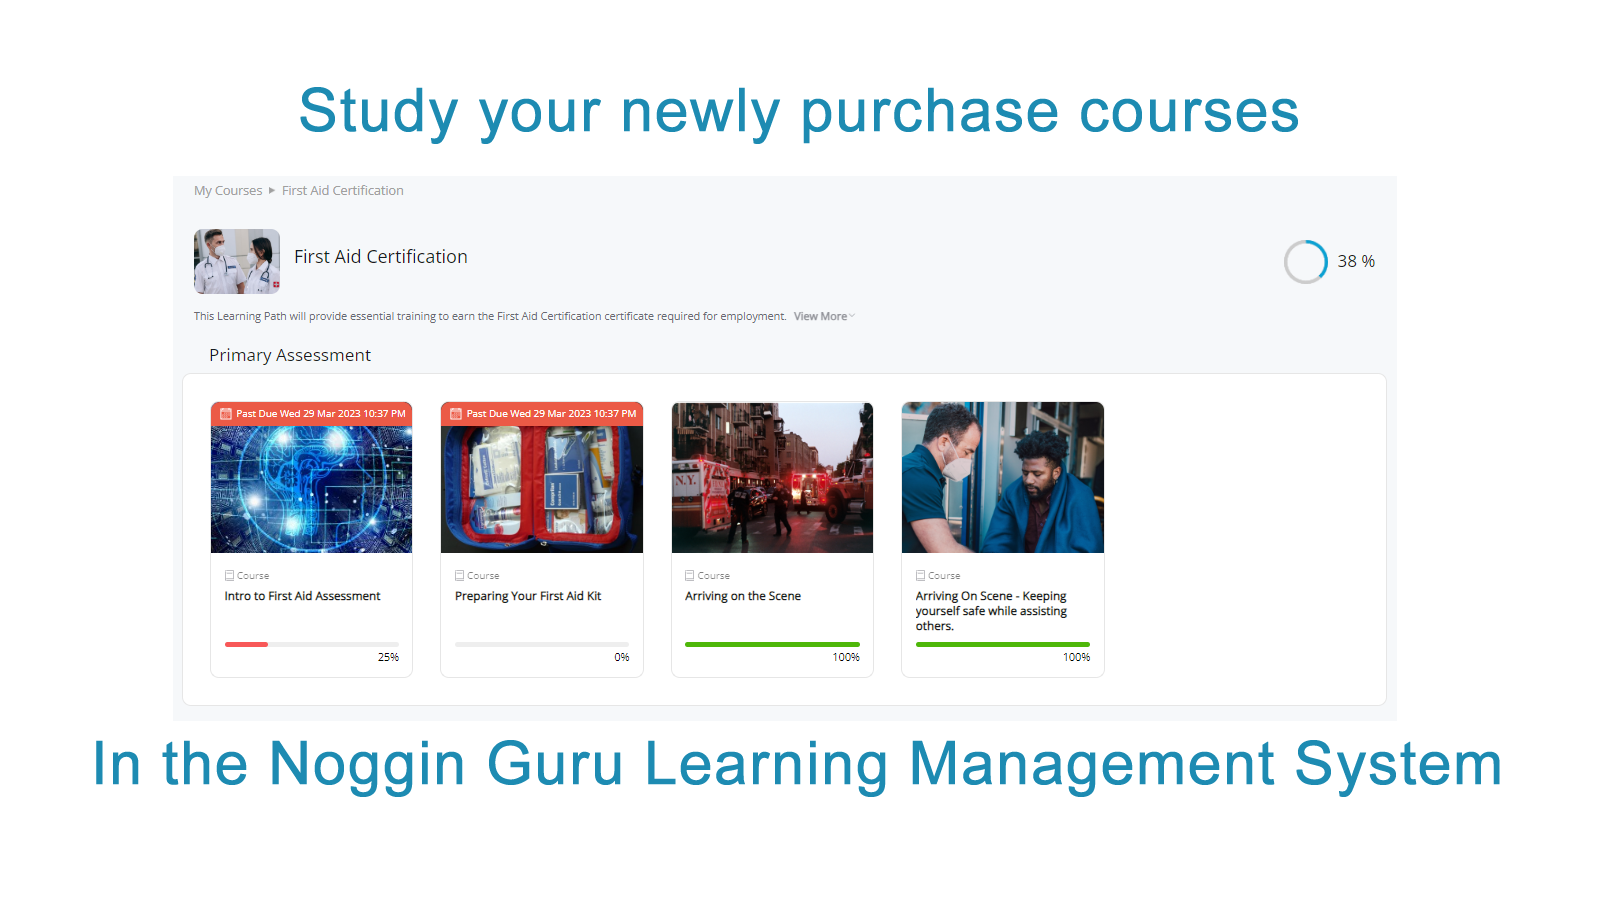 Study your newly purchased courses in the Noggin Guru LMS